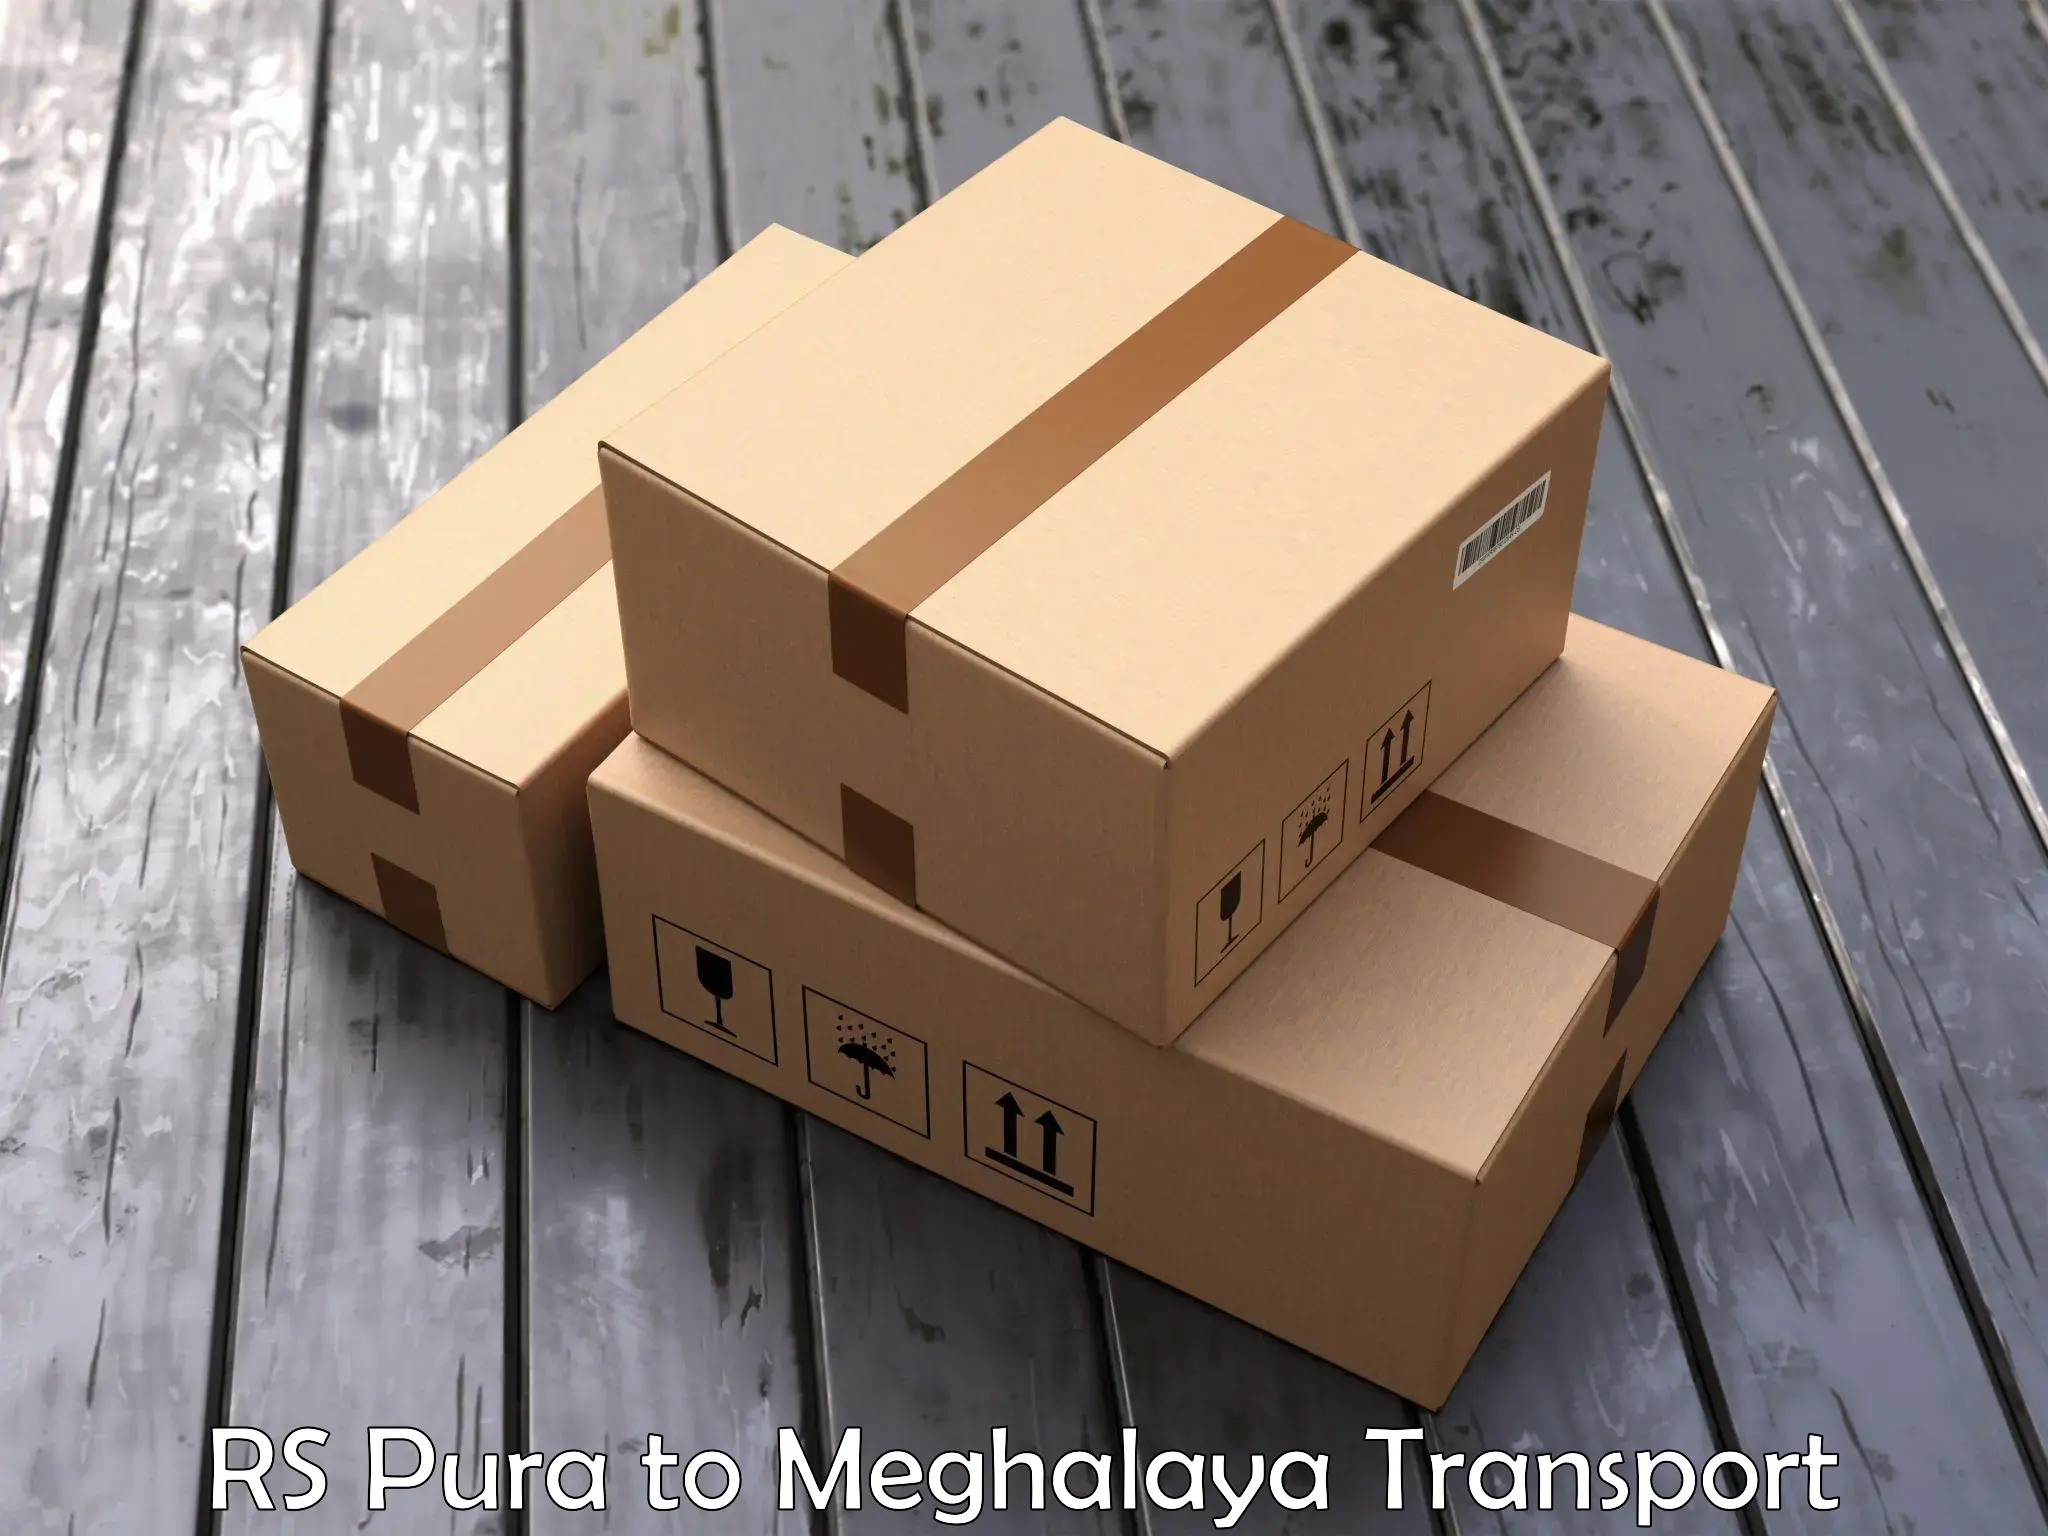 Commercial transport service RS Pura to Meghalaya